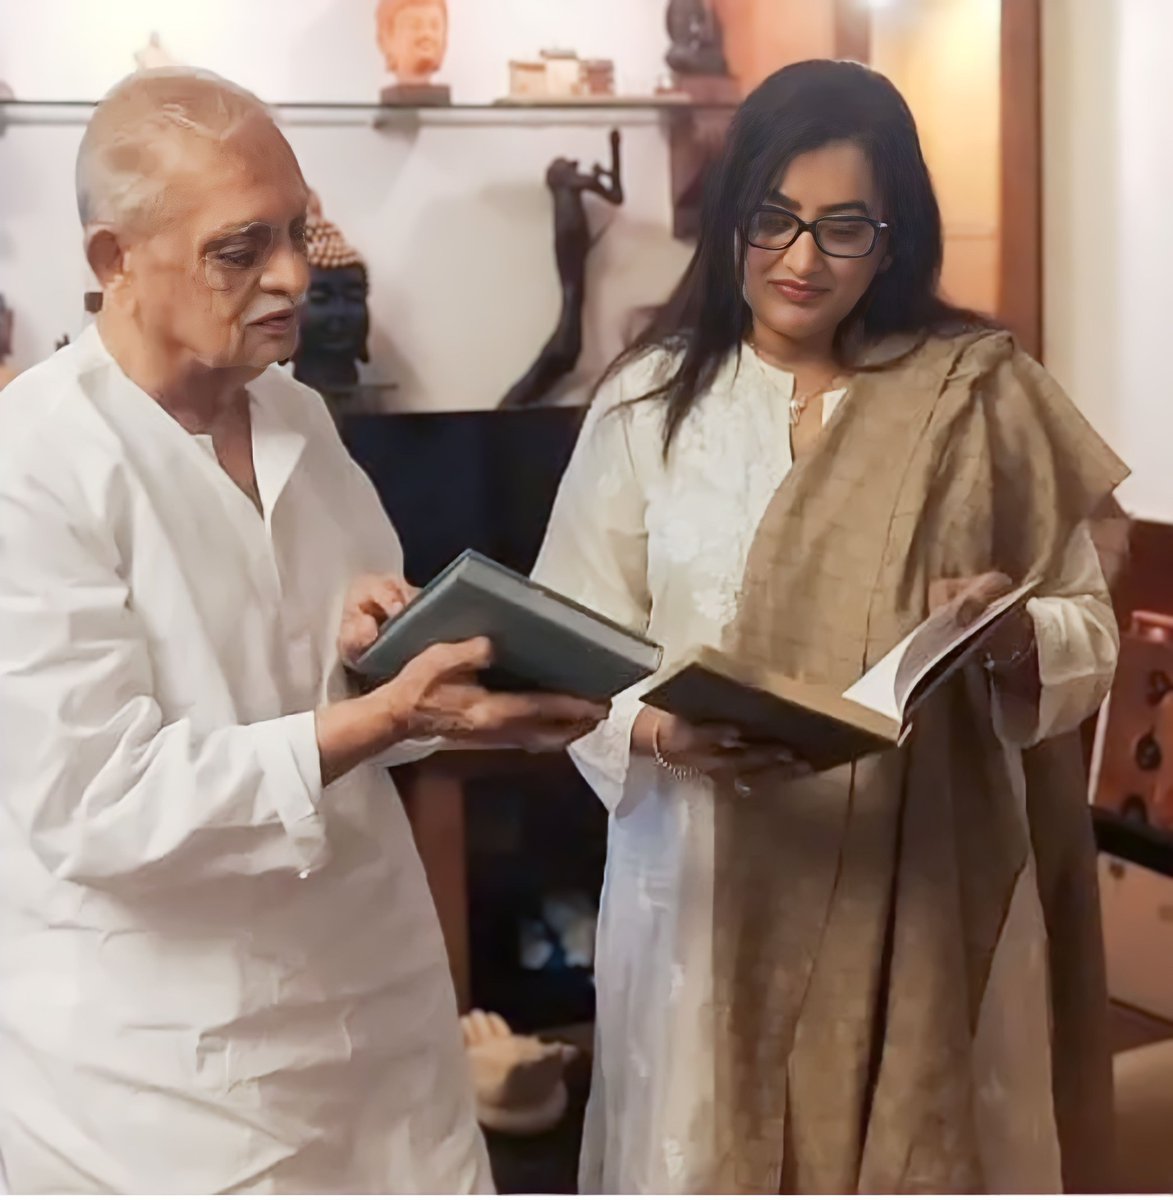 Congratulations to the legendary and one of my all time favorite movie director/writer/lyricist and poet, Gulzar ji on being conferred with the prestigious Jnanpith Award . #gulzarsaab #gulzarpoetry #gulzar #JnanpithAward